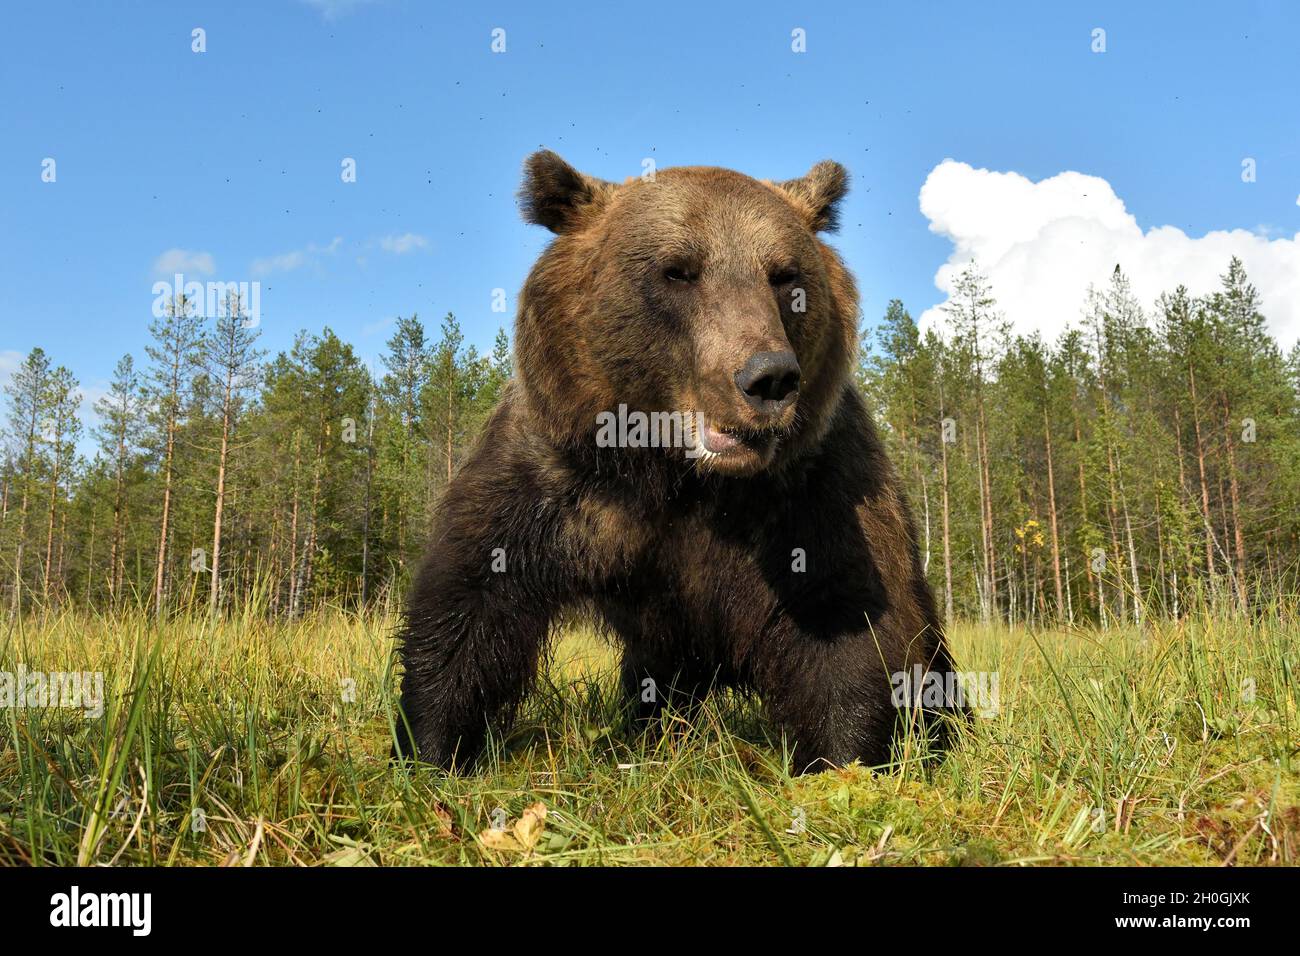 Big male brown bear at close, wide angle view of the bear Stock Photo